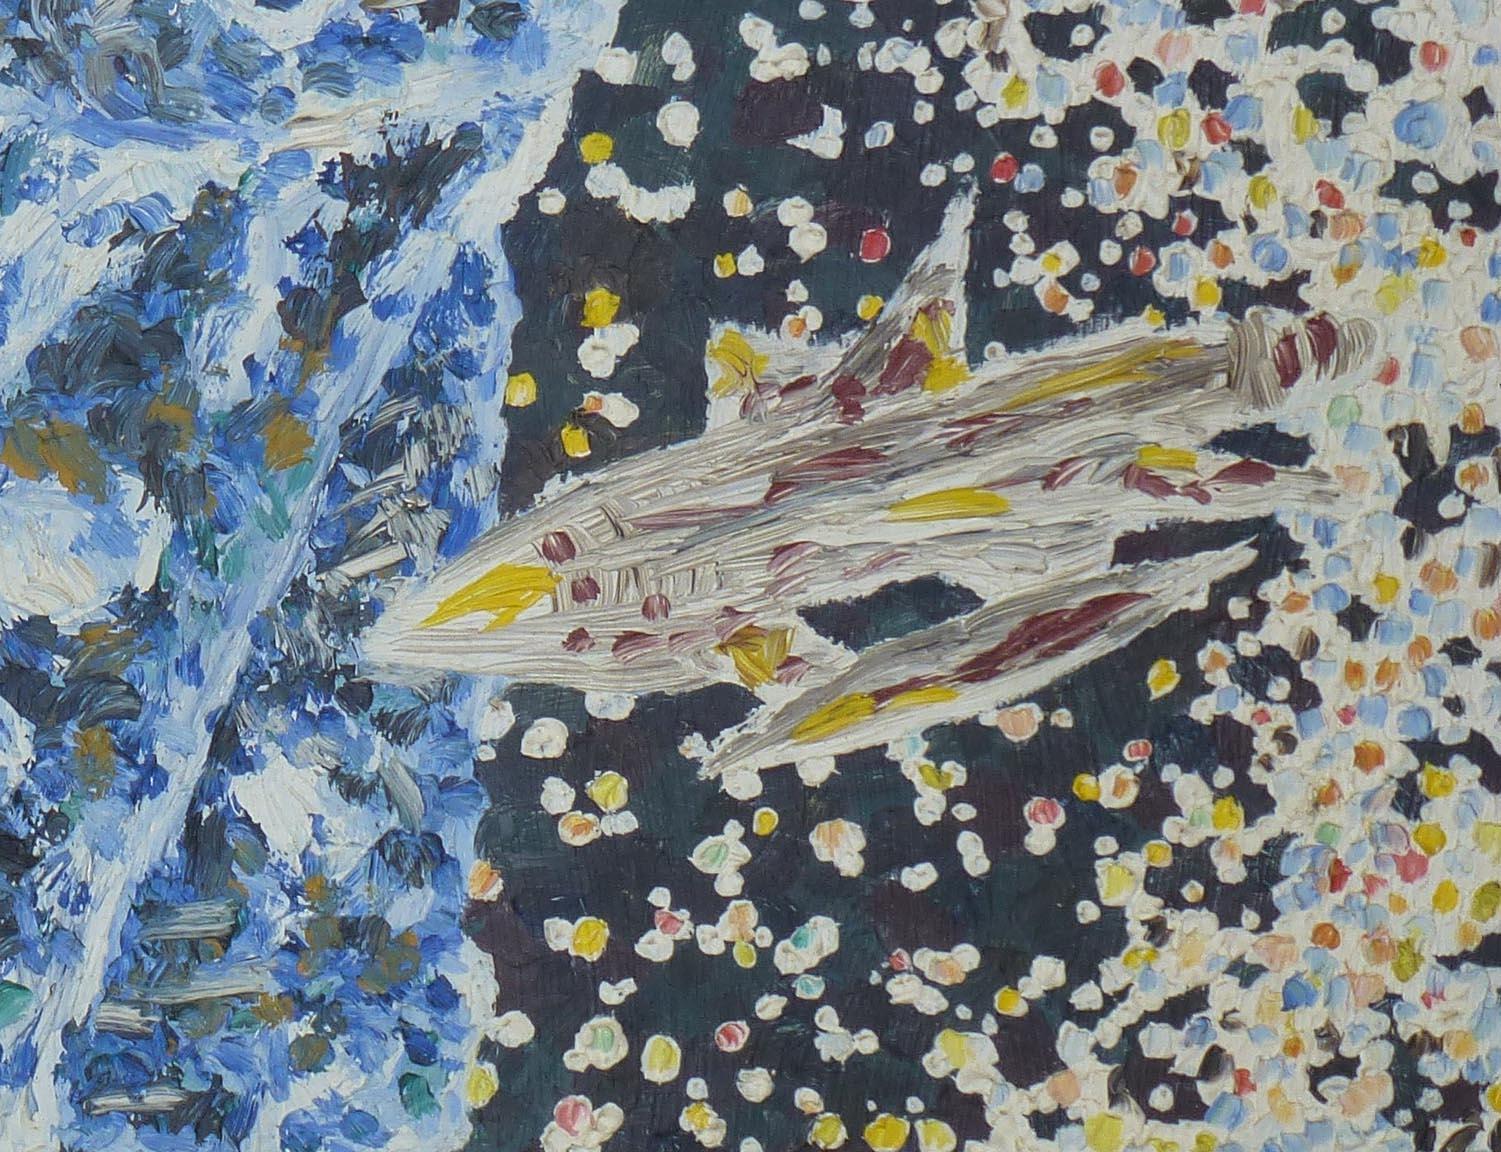 Canvas Spaceship and Alien Landscape by the Outsider Sci-Fi Artist Robert E. Gilbert For Sale